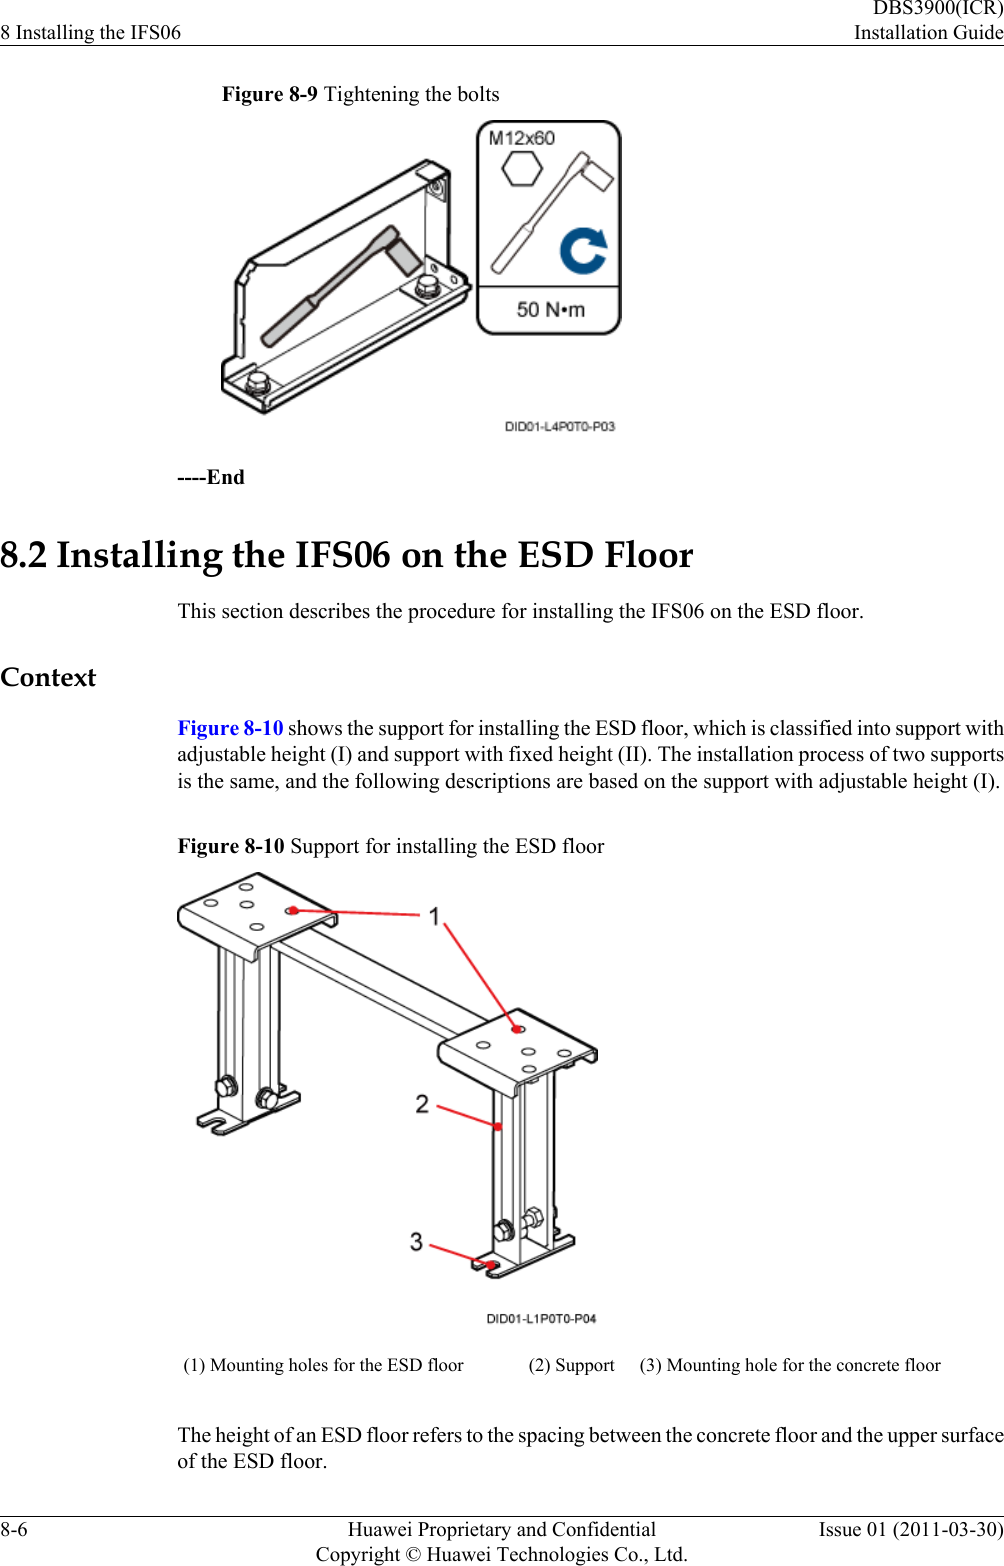 Figure 8-9 Tightening the bolts----End8.2 Installing the IFS06 on the ESD FloorThis section describes the procedure for installing the IFS06 on the ESD floor.ContextFigure 8-10 shows the support for installing the ESD floor, which is classified into support withadjustable height (I) and support with fixed height (II). The installation process of two supportsis the same, and the following descriptions are based on the support with adjustable height (I).Figure 8-10 Support for installing the ESD floor(1) Mounting holes for the ESD floor (2) Support (3) Mounting hole for the concrete floorThe height of an ESD floor refers to the spacing between the concrete floor and the upper surfaceof the ESD floor.8 Installing the IFS06DBS3900(ICR)Installation Guide8-6 Huawei Proprietary and ConfidentialCopyright © Huawei Technologies Co., Ltd.Issue 01 (2011-03-30)